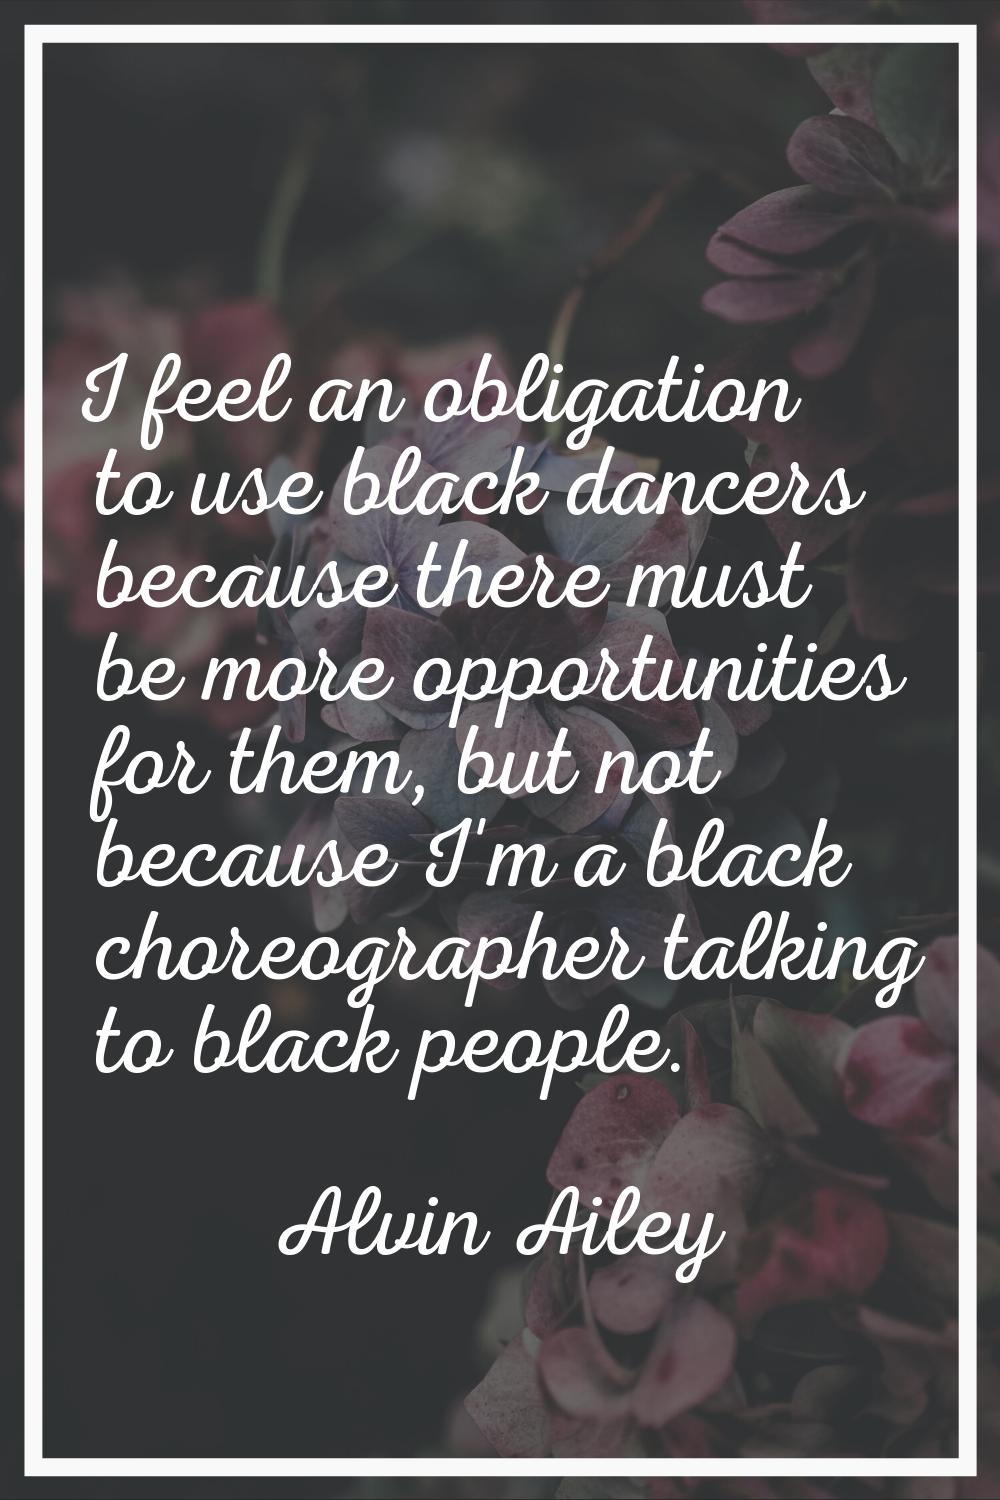 I feel an obligation to use black dancers because there must be more opportunities for them, but no